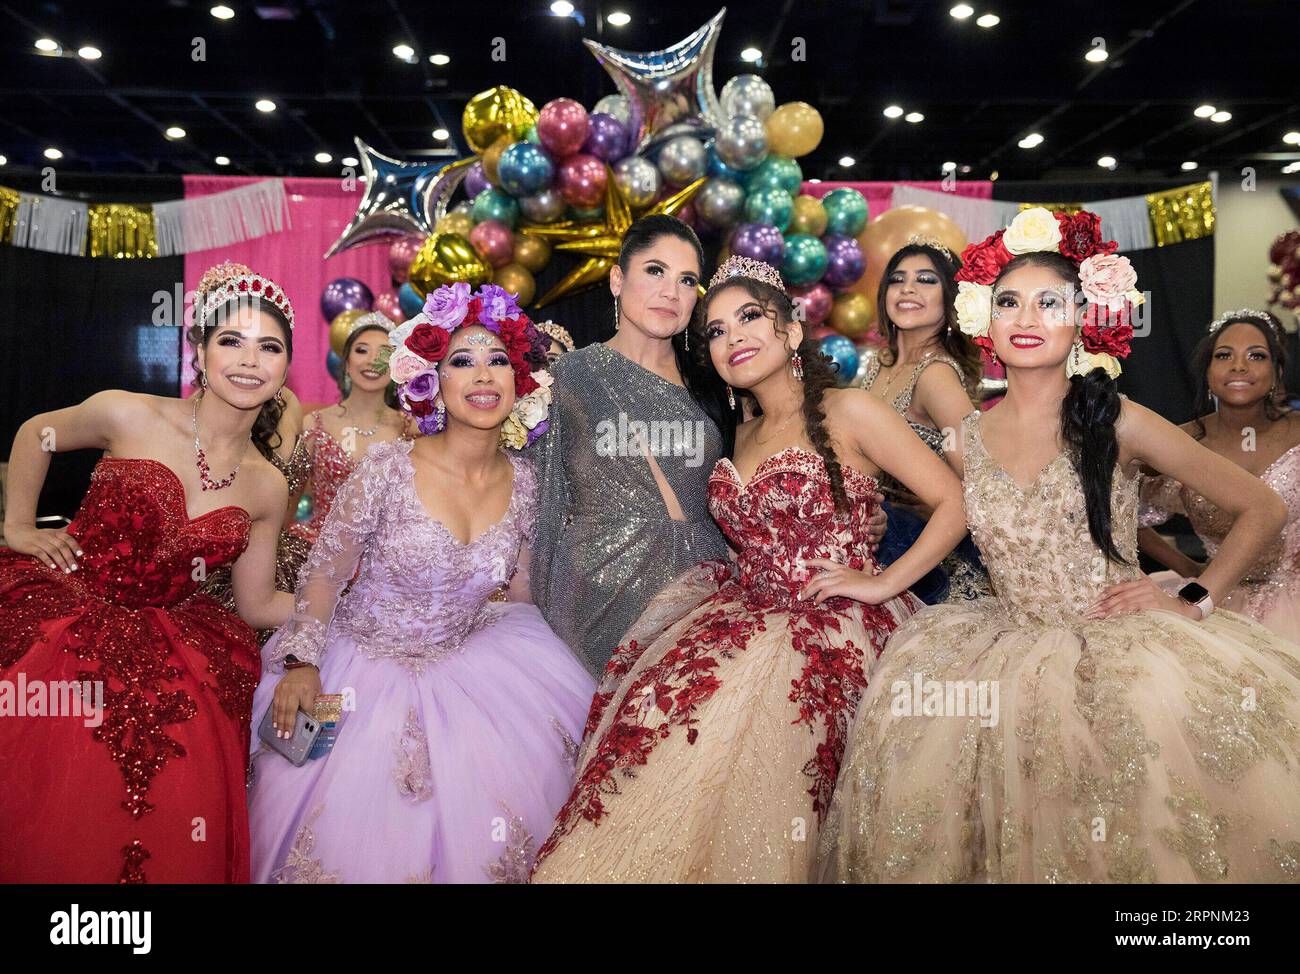 200302 -- HOUSTON, March 2, 2020 Xinhua -- A Houston-based Quinceanera dress designer takes a photograph with her models at the Big One Quinceanera Expo in Houston, Texas, United States, on March 1, 2020. Quinceanera is a tradition in Latin America marking the transition of girls from childhood to adulthood. Photo by Yi-Chin Lee/Xinhua U.S.-HOUSTON- QUINCEANERA EXPO PUBLICATIONxNOTxINxCHN Stock Photo